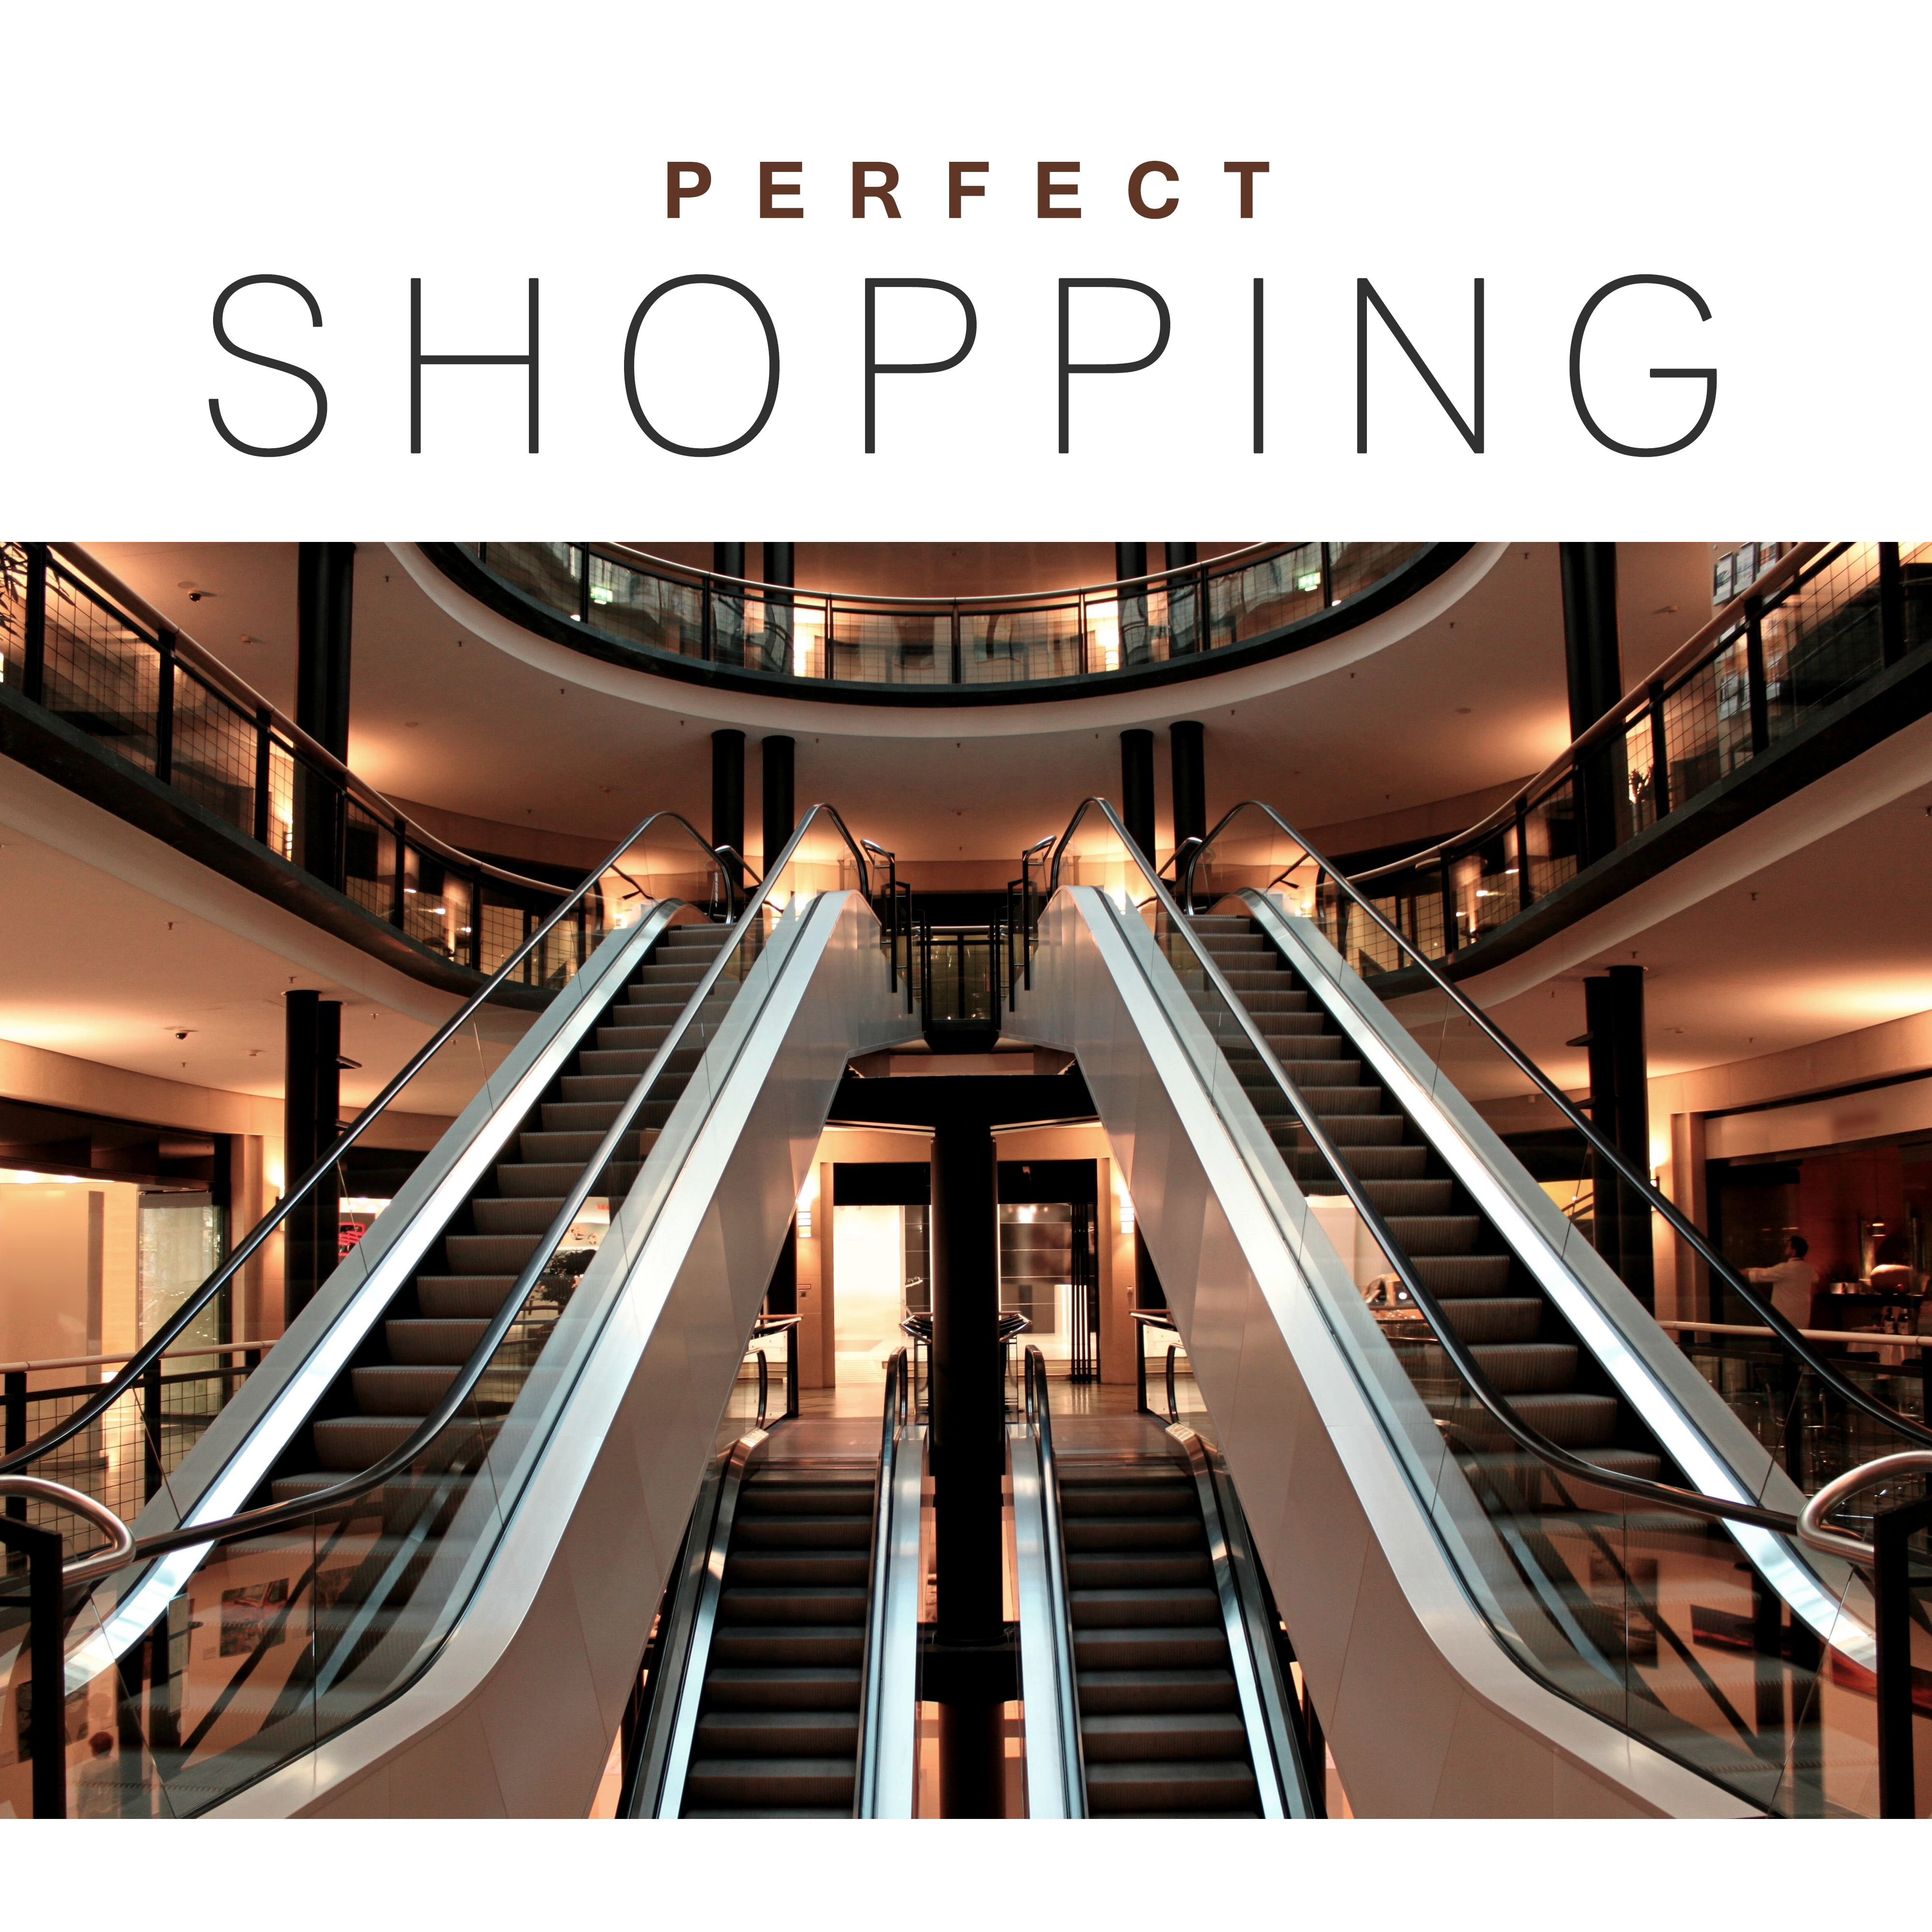 Perfect Shopping  Mellow Jazz, Best Background for Shopping Center, Jazz Cafe, Soothing Guitar, Piano Jazz Music, Coffee Talk